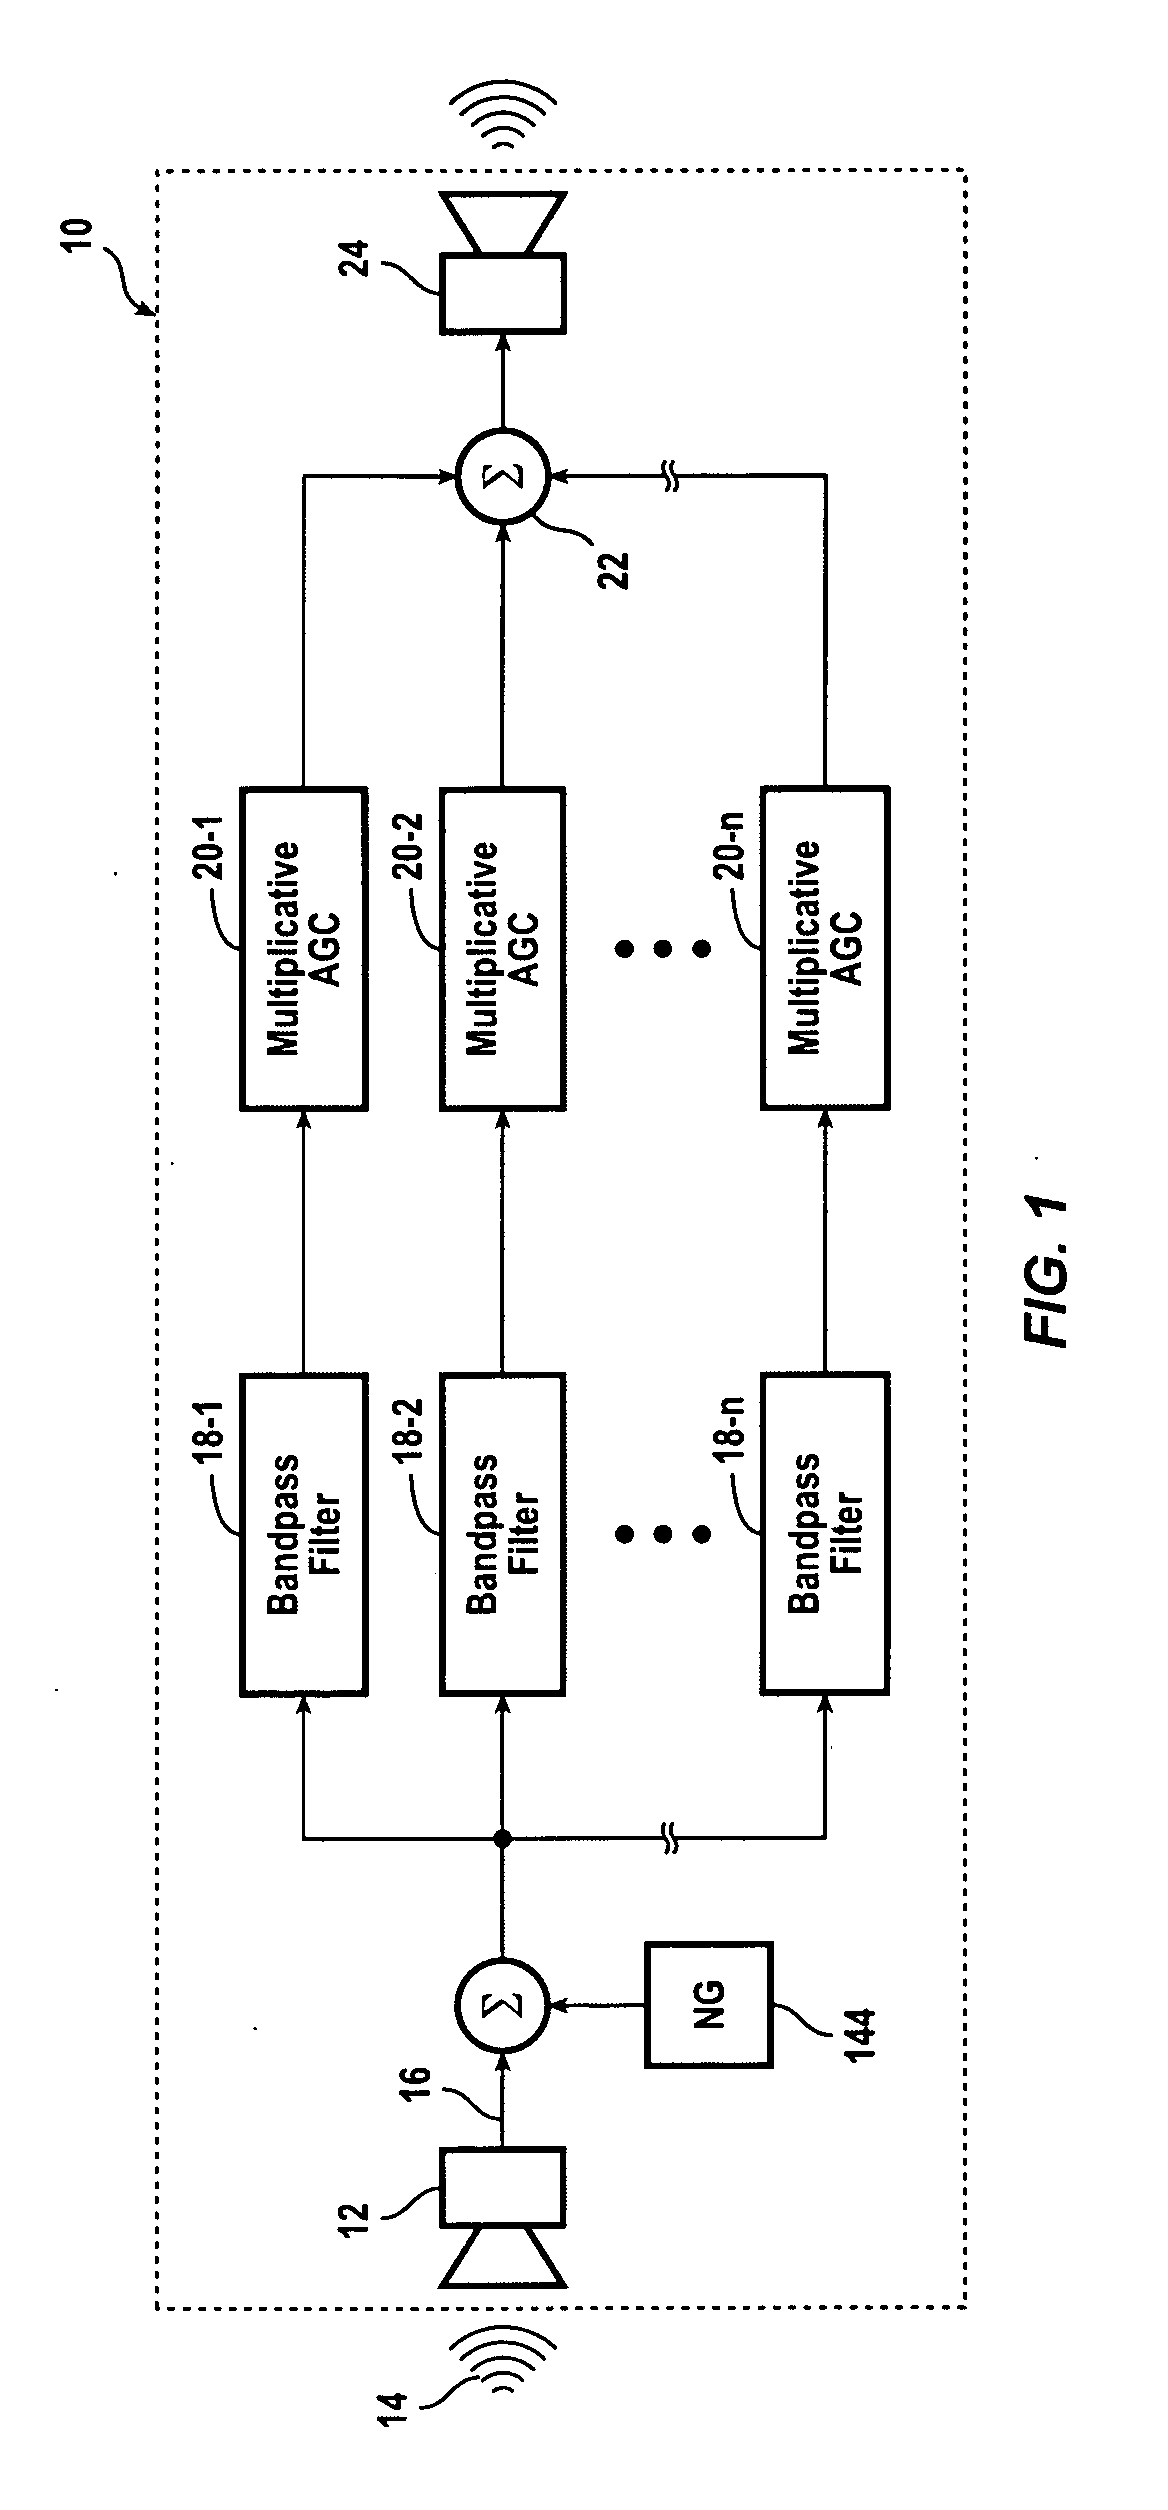 Hearing compensation system incorporating signal processing techniques